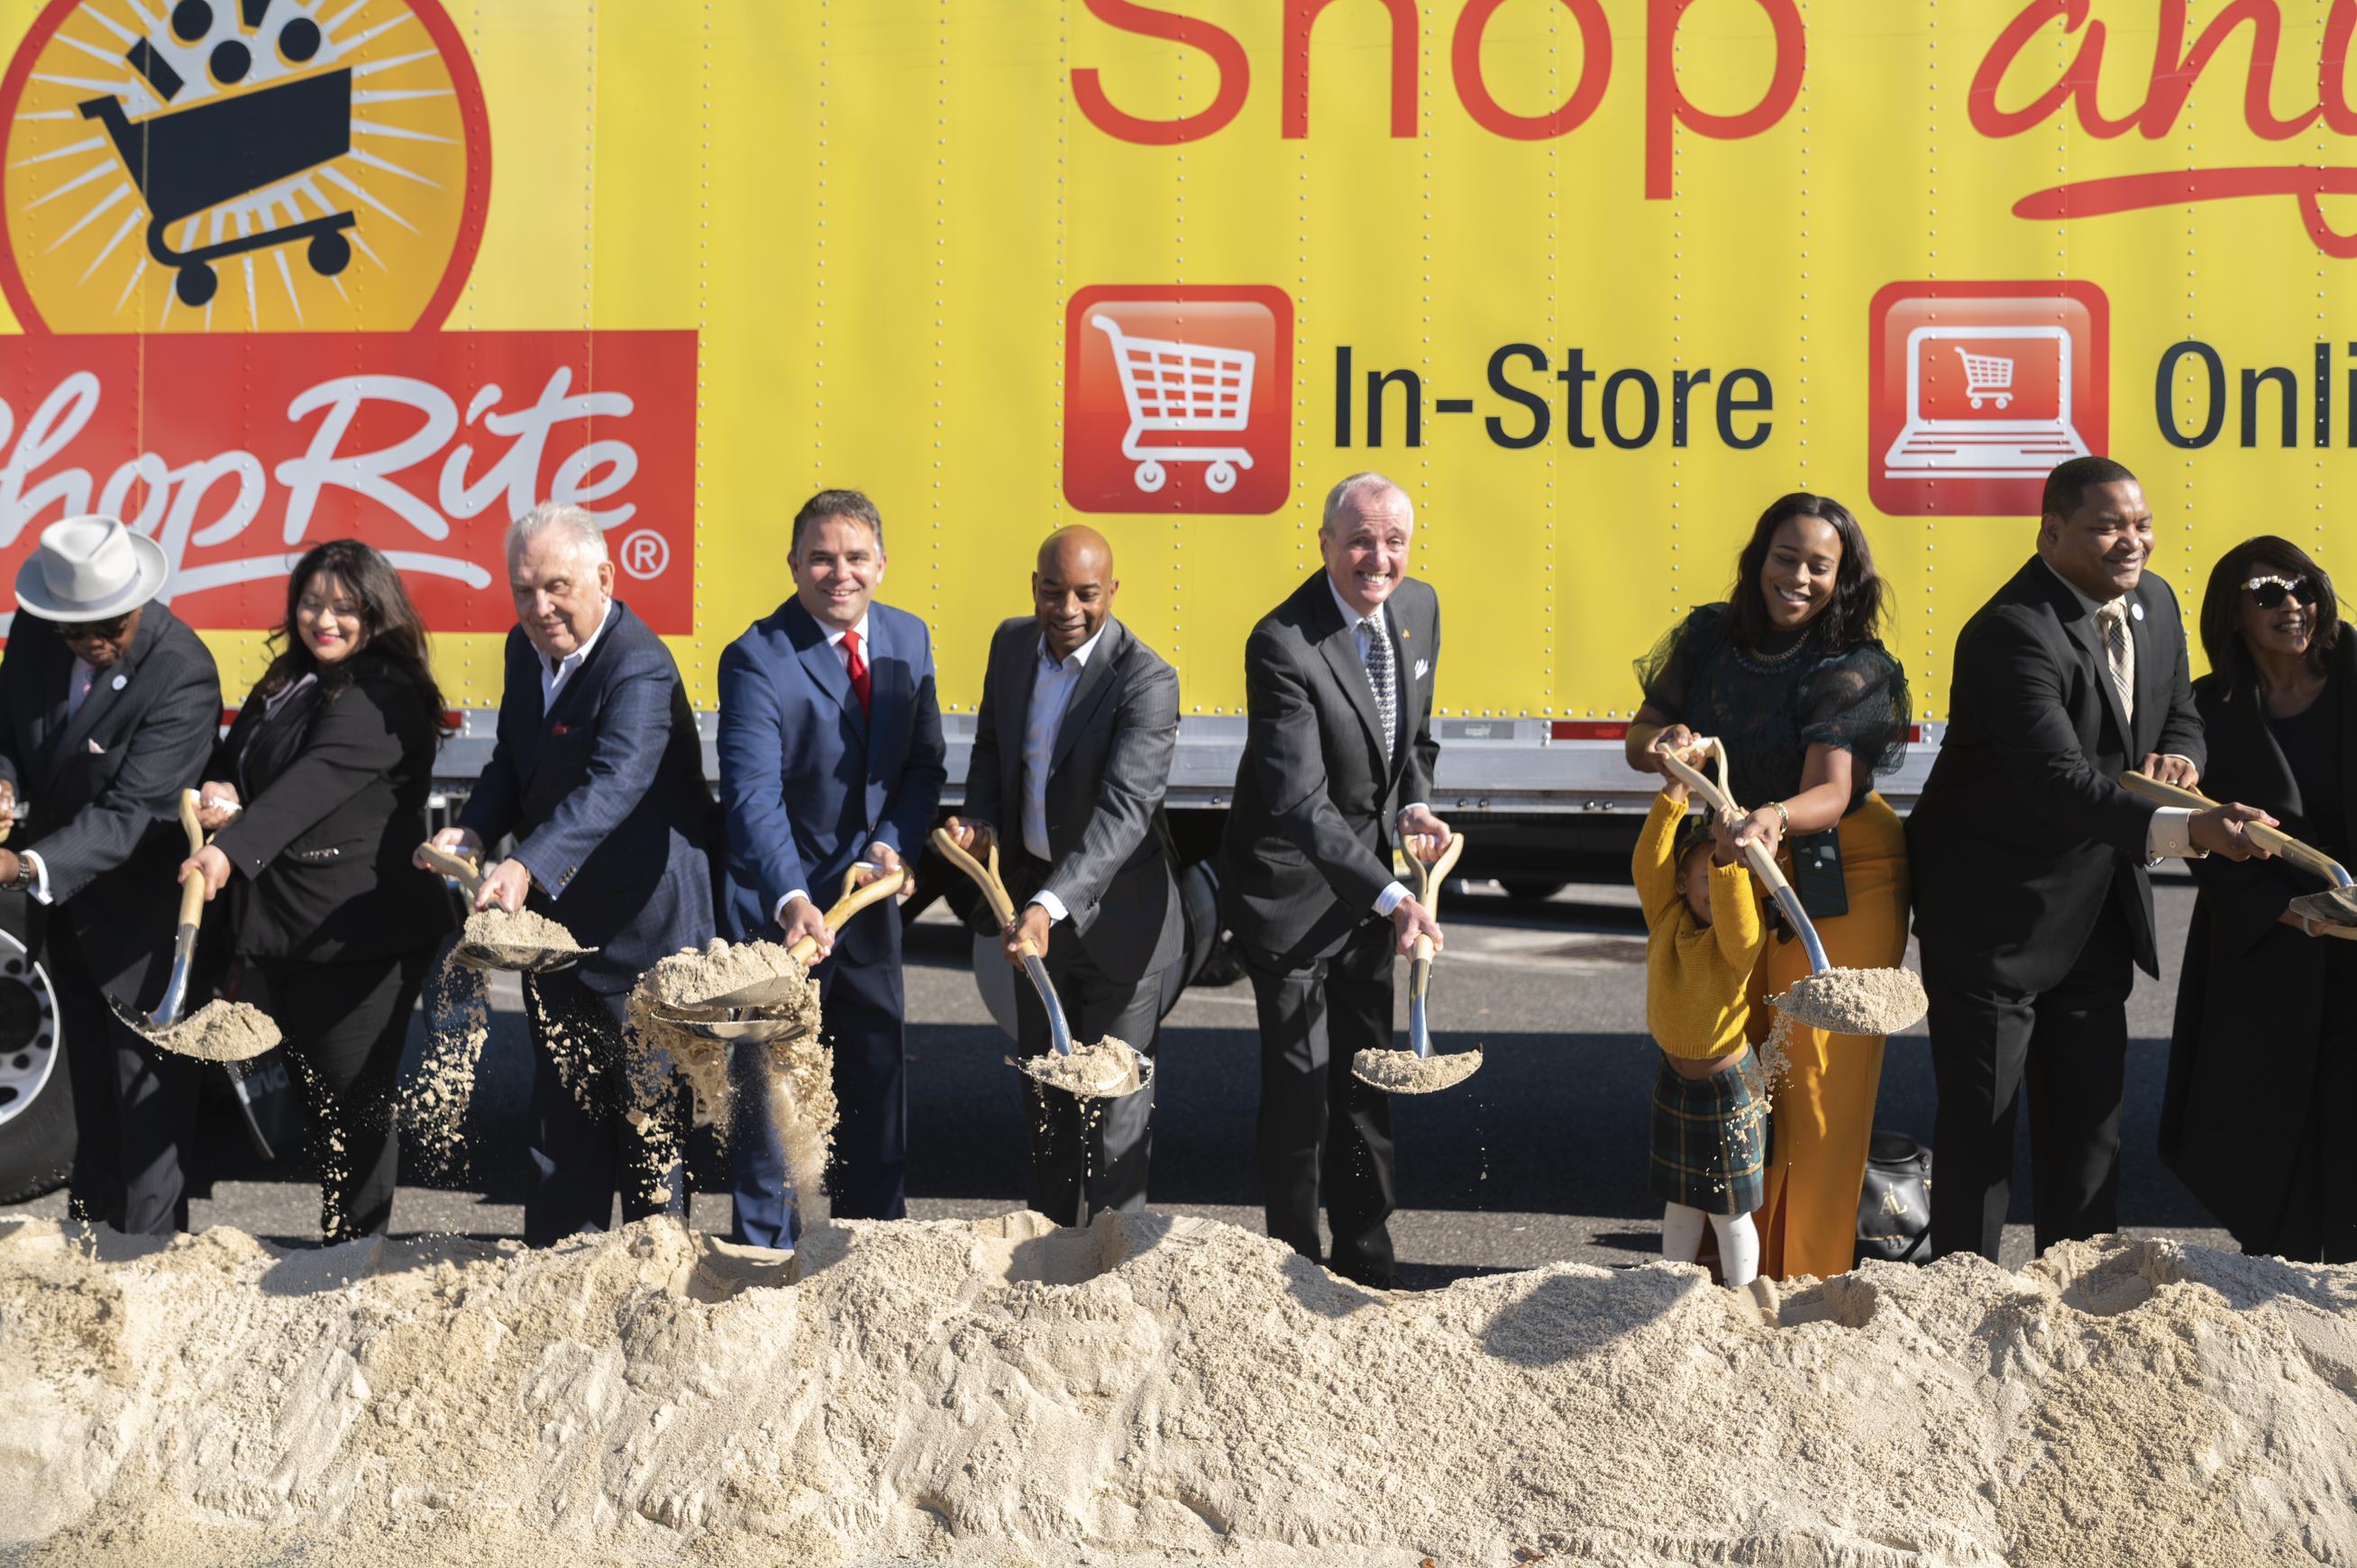 2 New ShopRite Stores Coming To South Jersey: Report